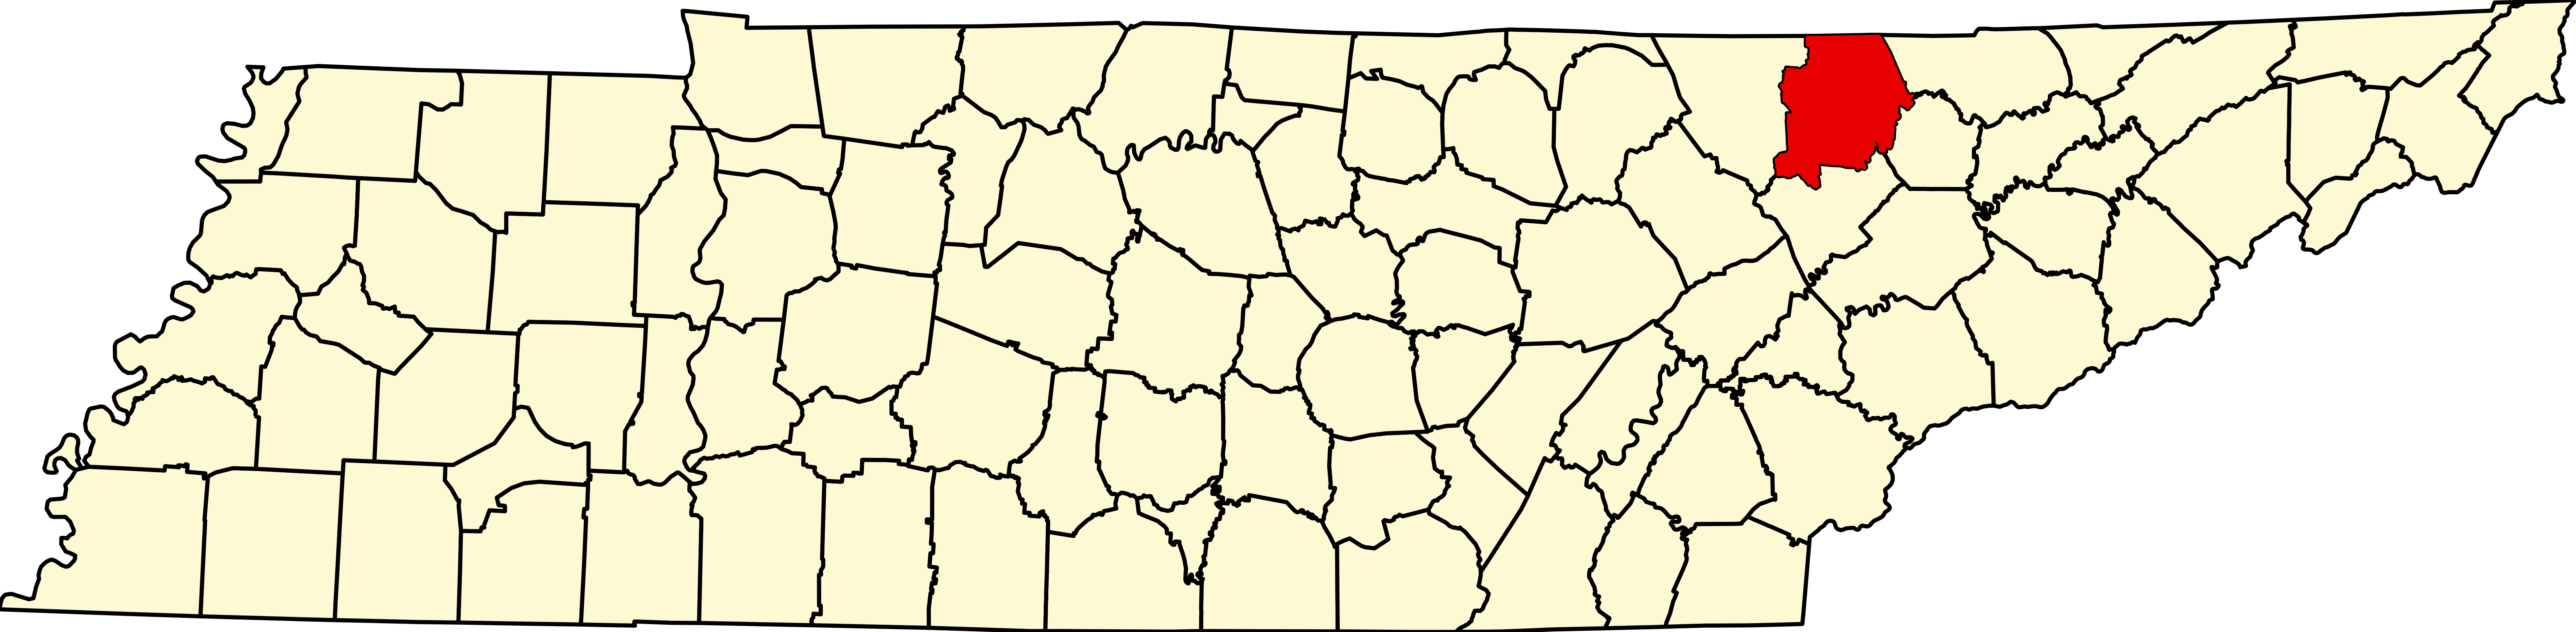 upload.wikimedia.org/wikipedia/commons/thumb/0/05/Map_of_Tennessee_highlighting_Campbell_County.svg/7814px-Map_of_Tennessee_highlighting_Campbell_County.svg.png